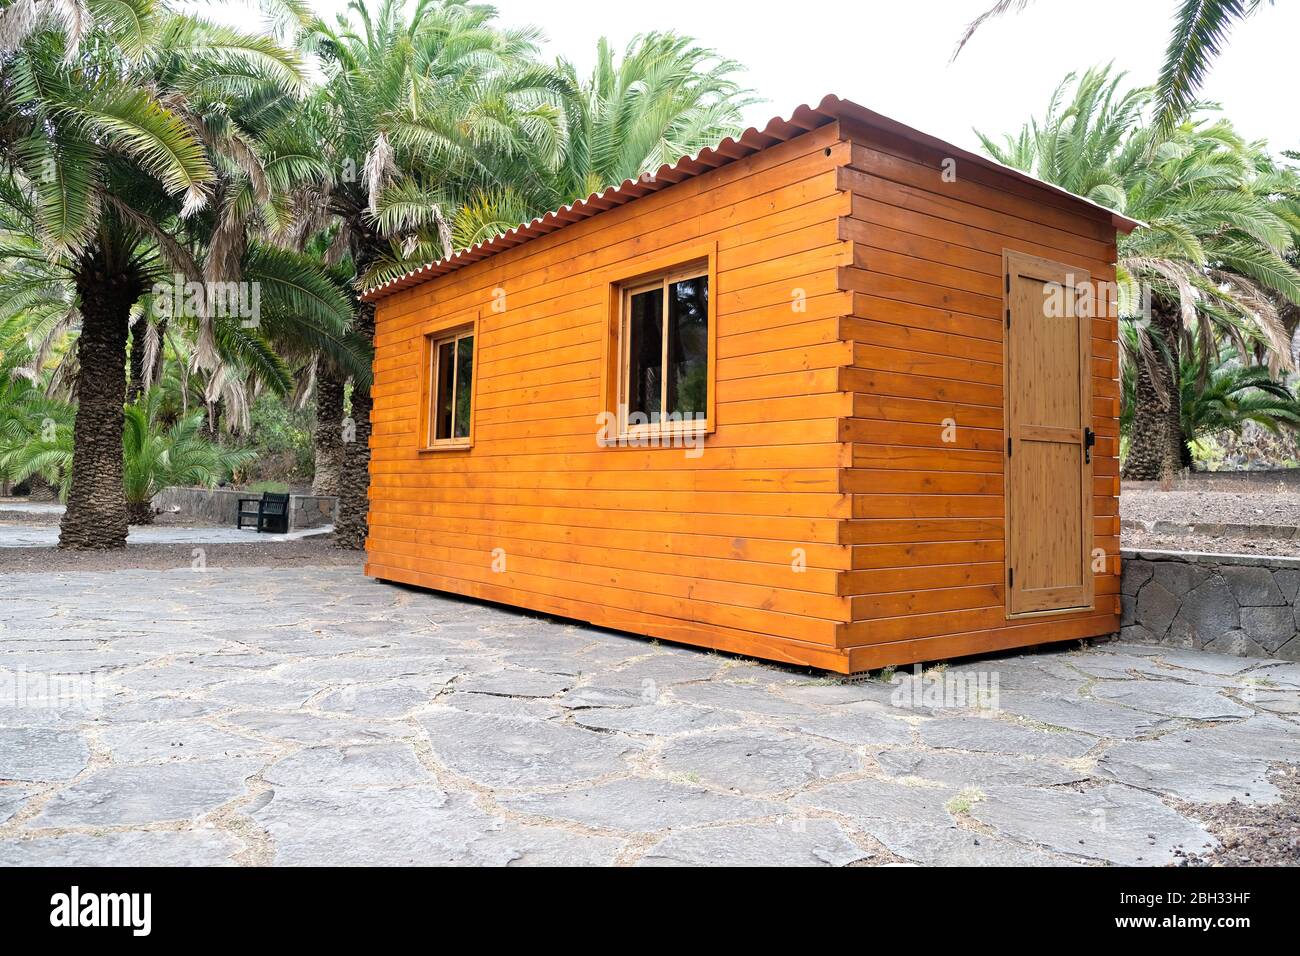 Simple wooden cabin with windows and roof in corrugated iron, surrounded by  palms, low angle view Stock Photo - Alamy